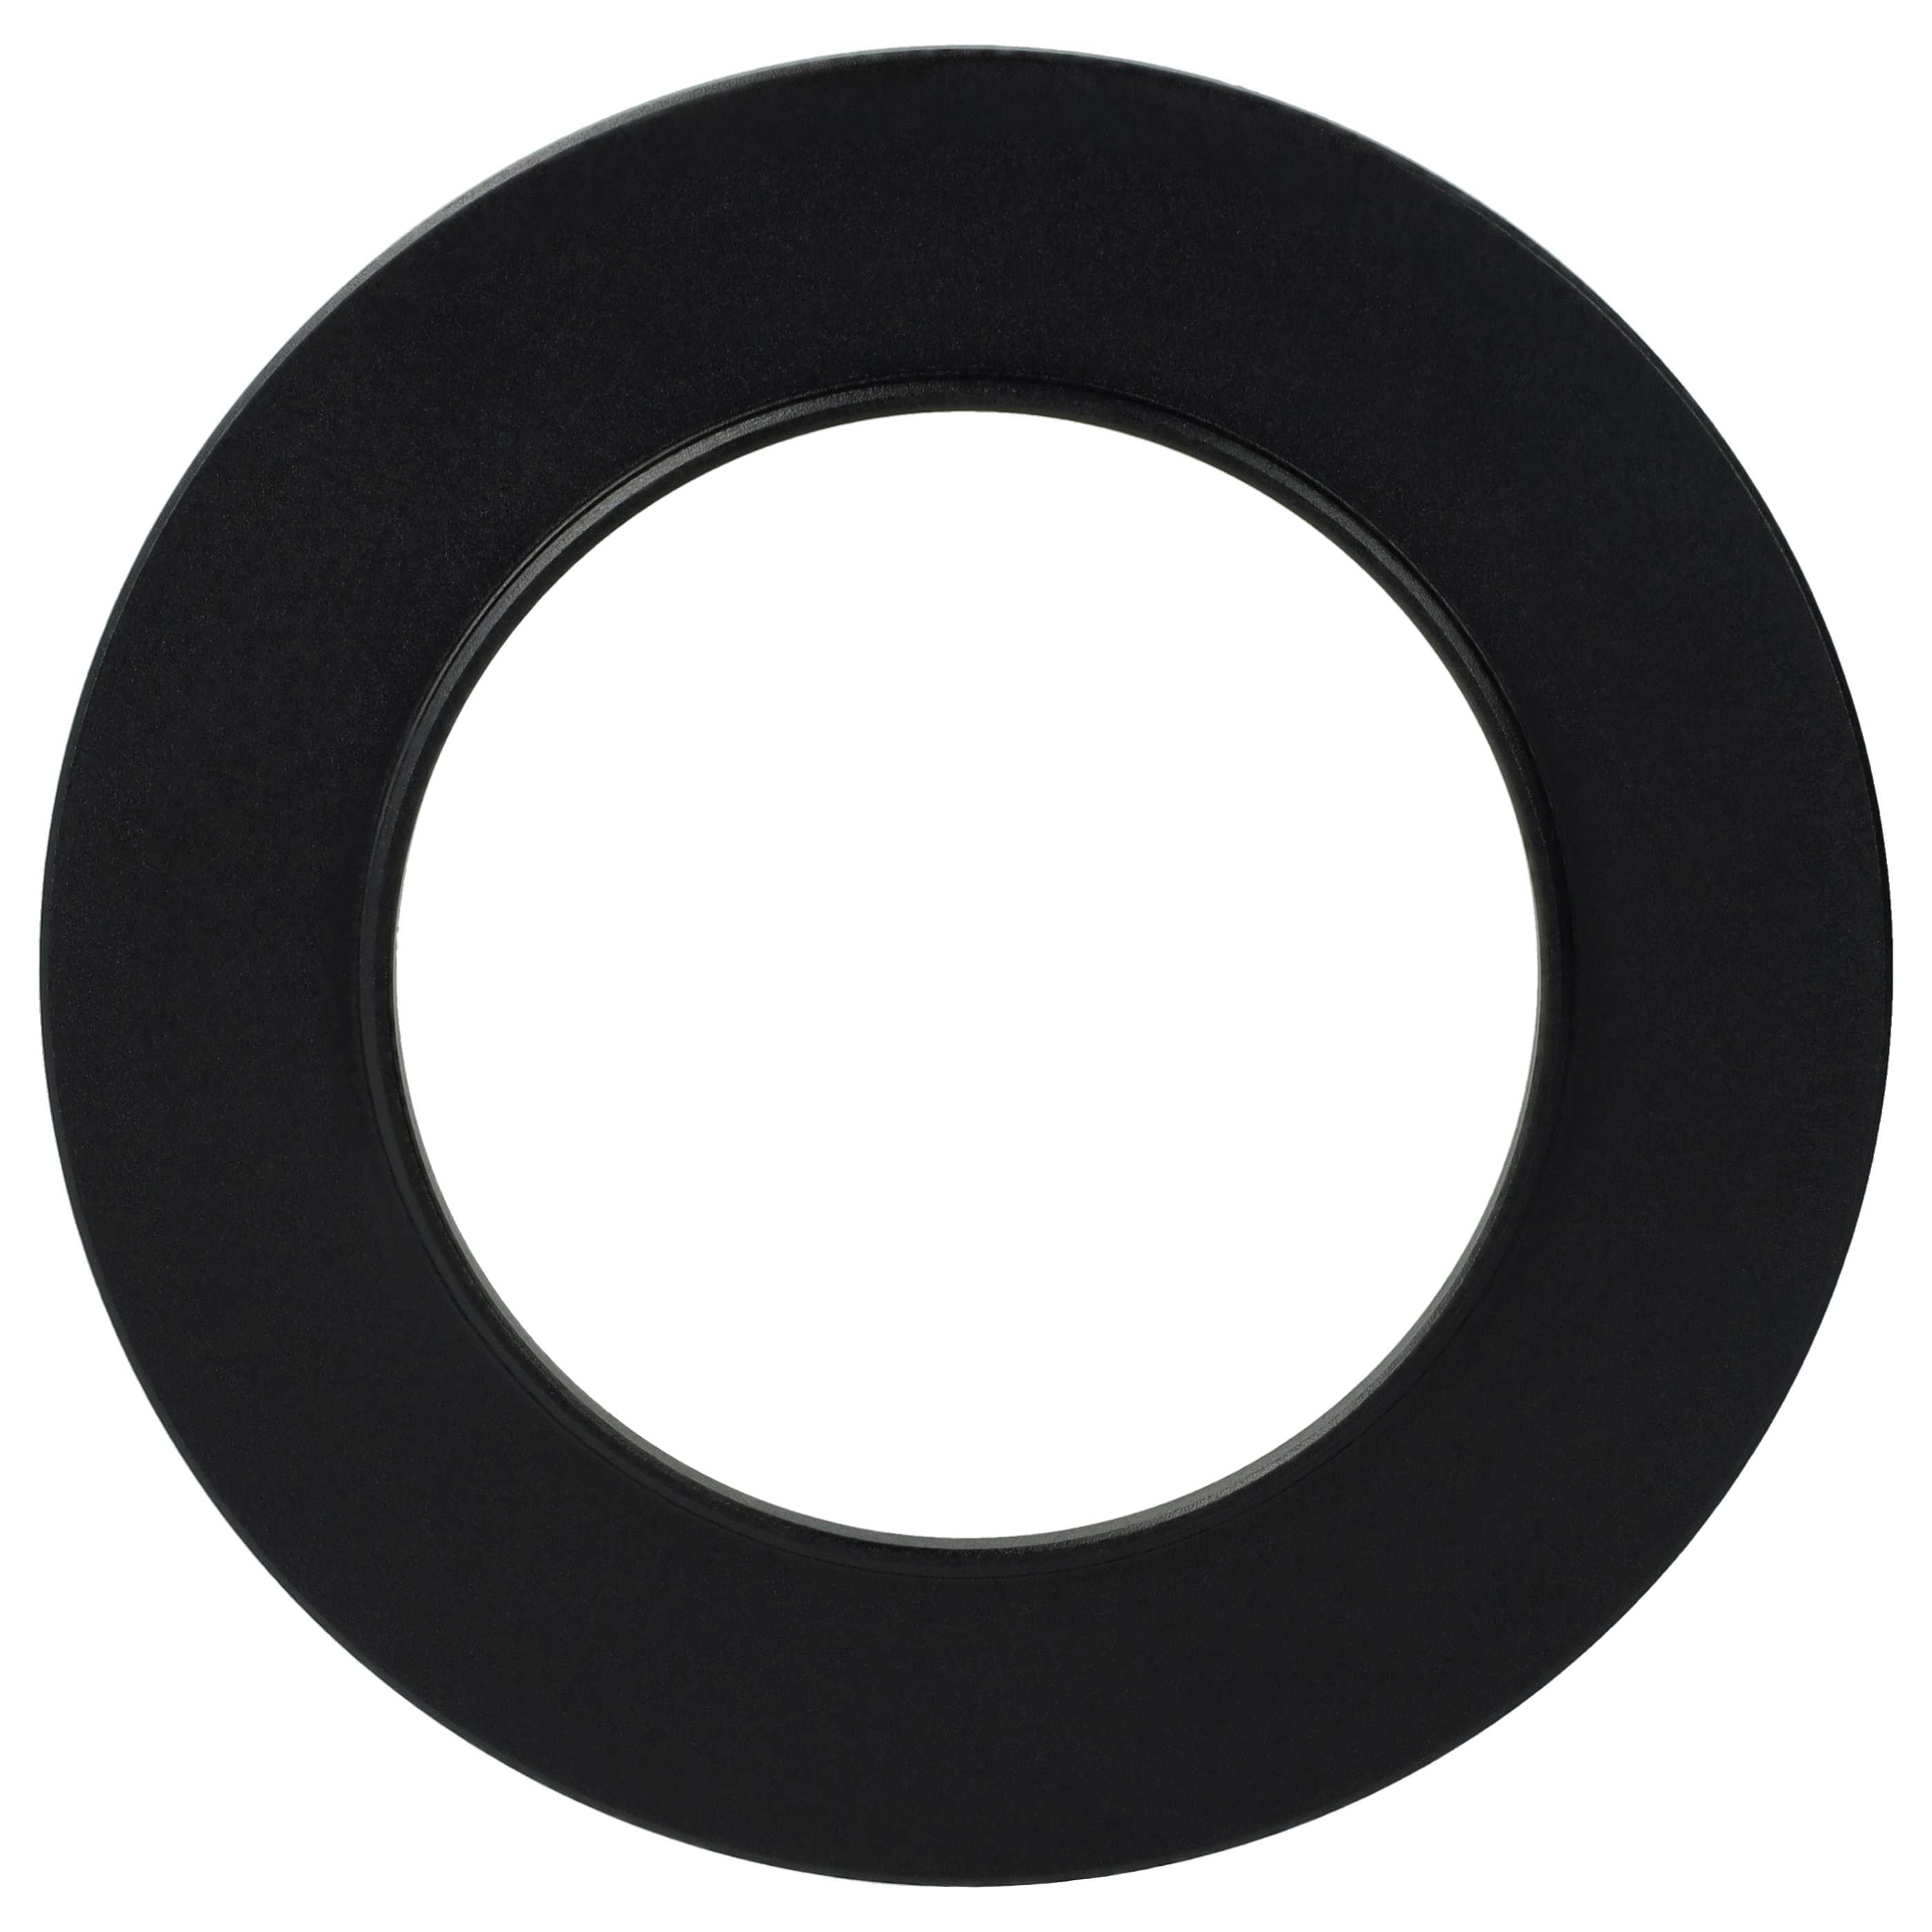 Step-Up Ring Adapter of 55 mm to 82 mmfor various Camera Lens - Filter Adapter